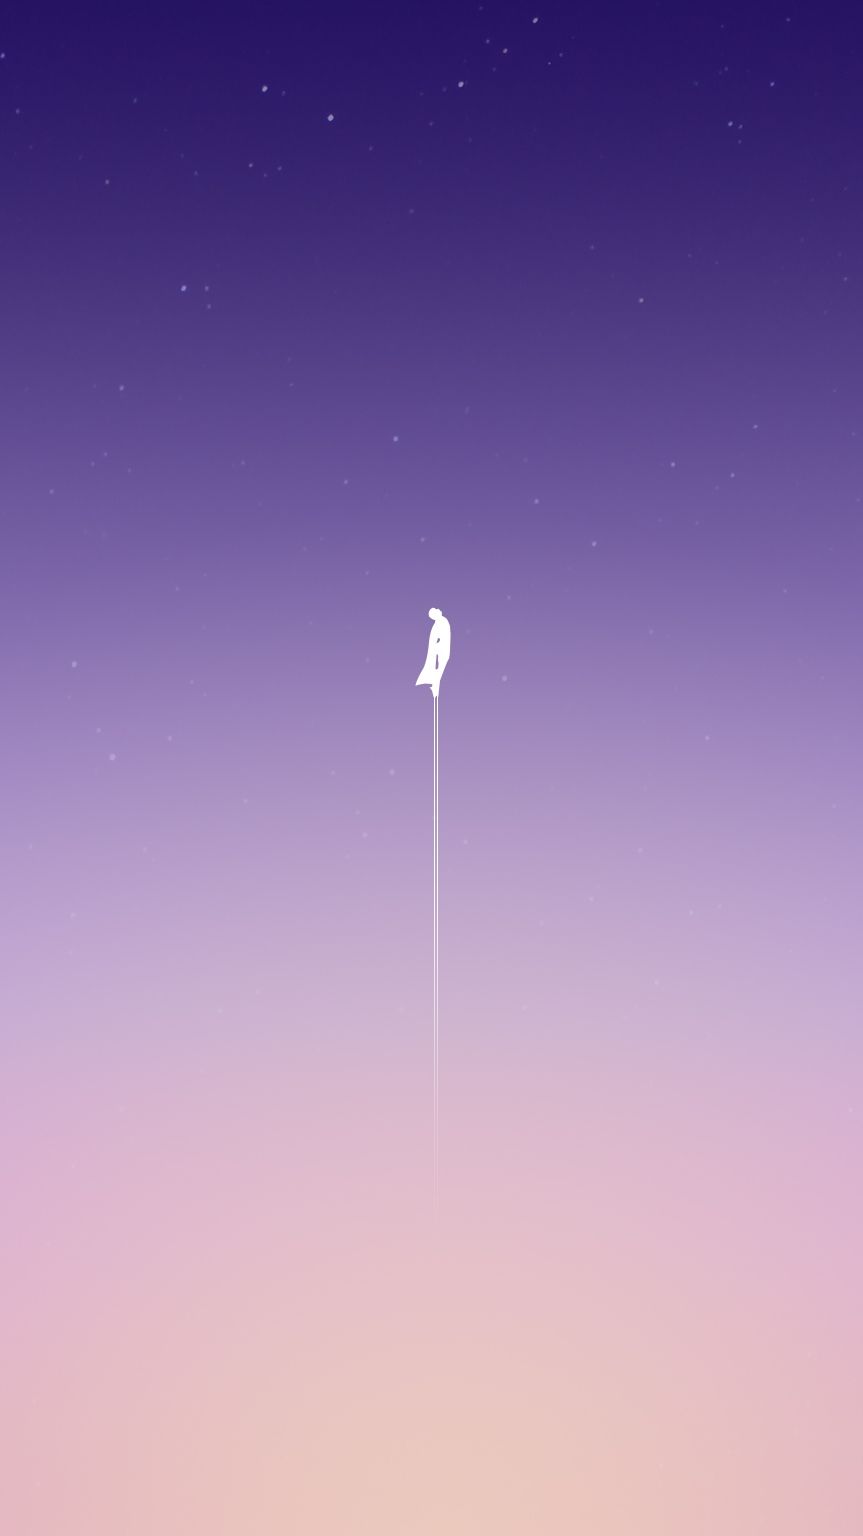 Superman Leaving The Earth iPhone Wallpaper